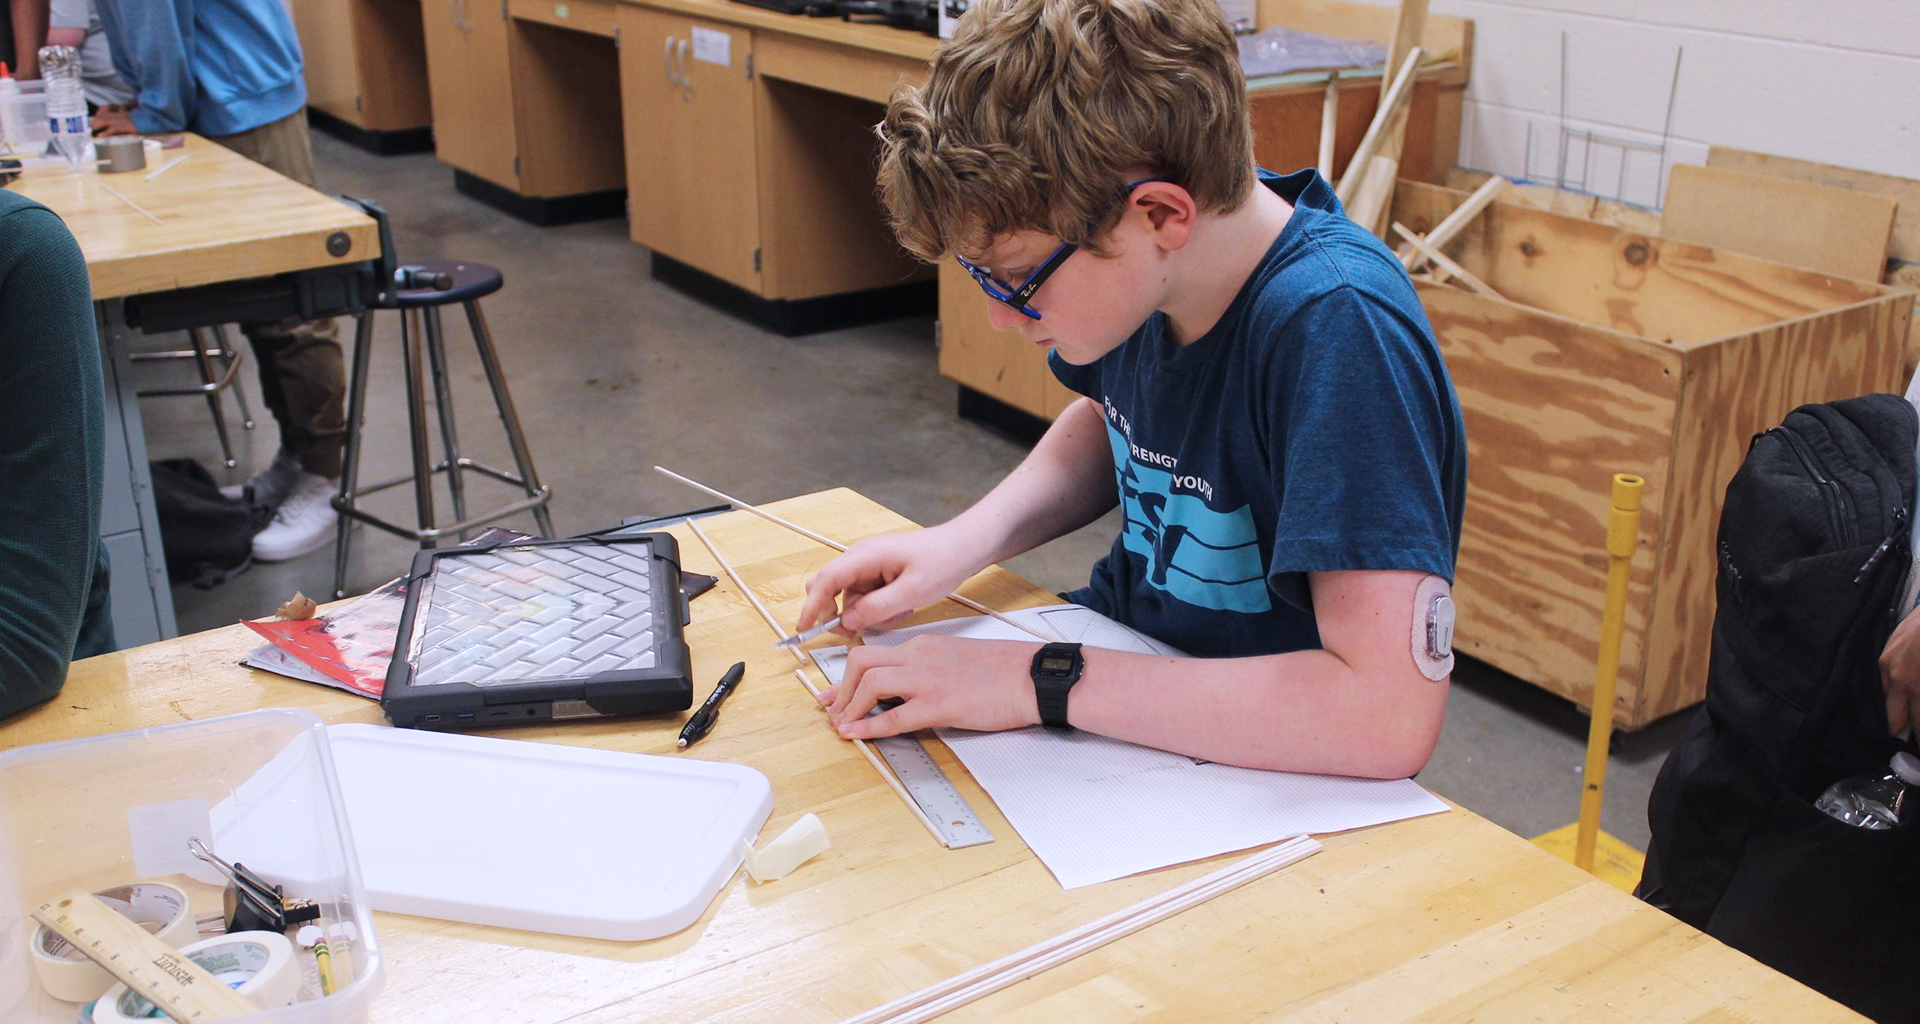 student working with a ruler at a desk.